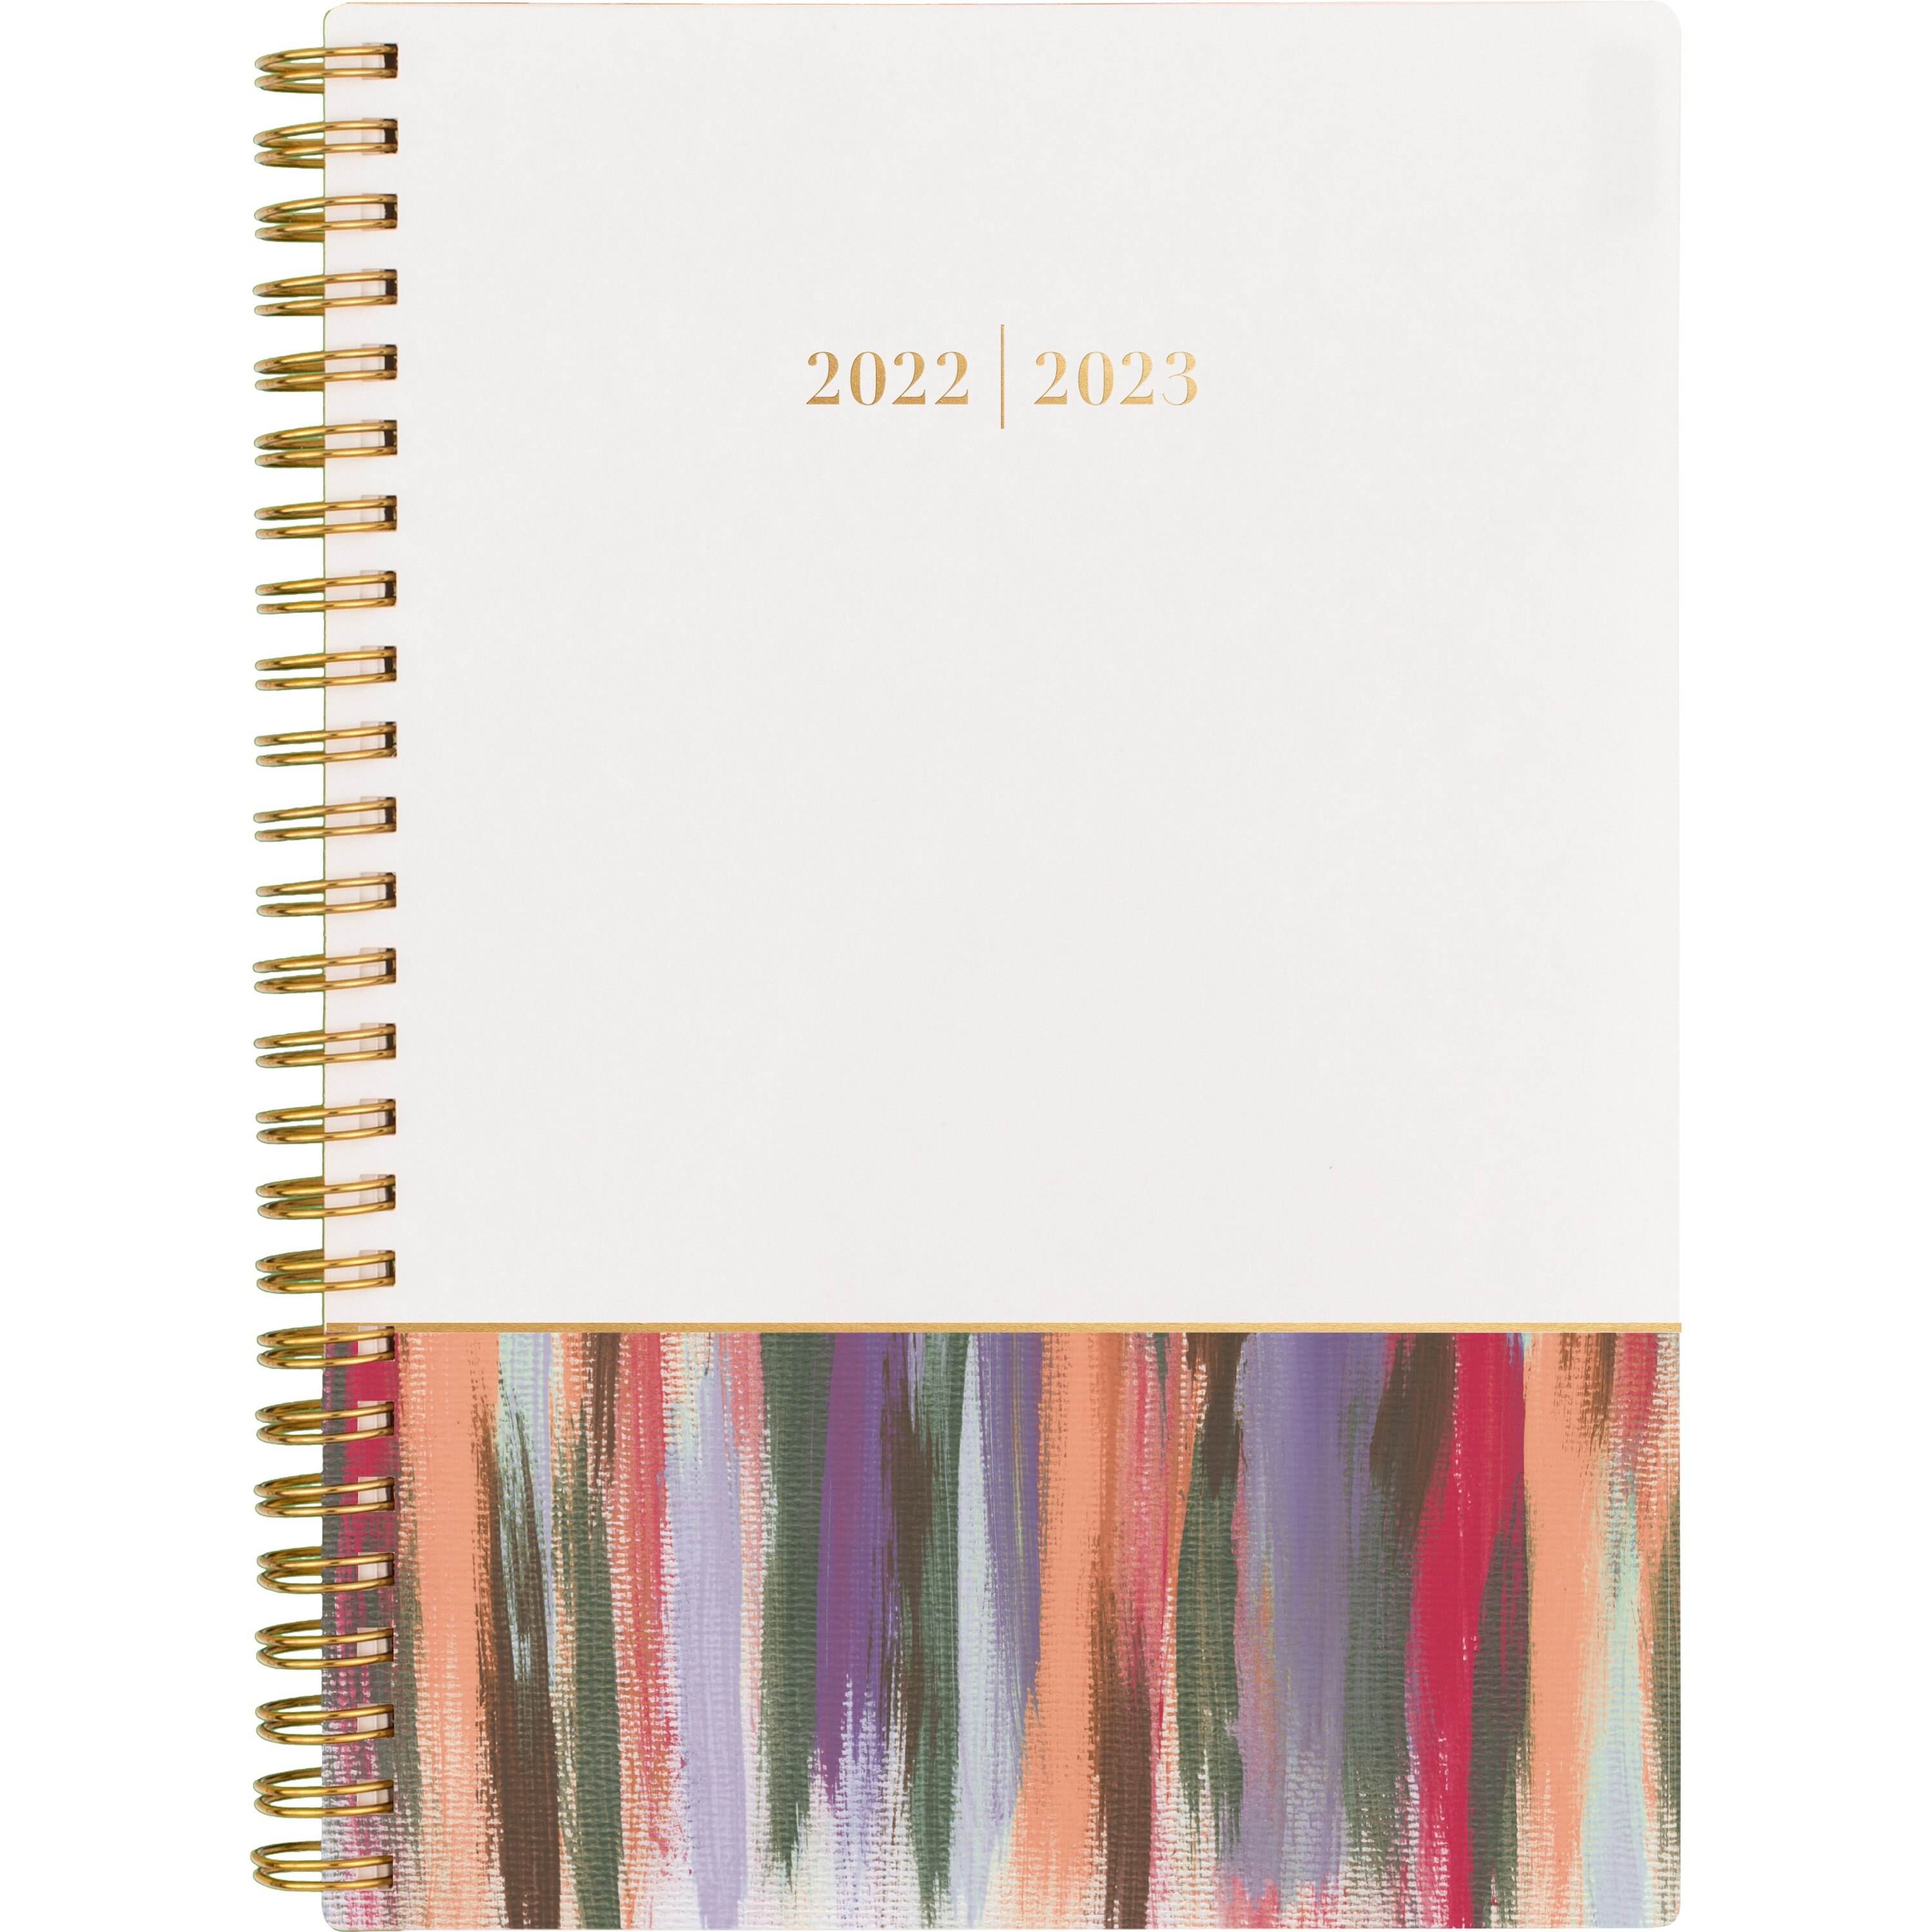 Cambridge(R) Expression Academic 2022-2023 Weekly Monthly Planner, Small, 5 1/2" x 8 1/2"